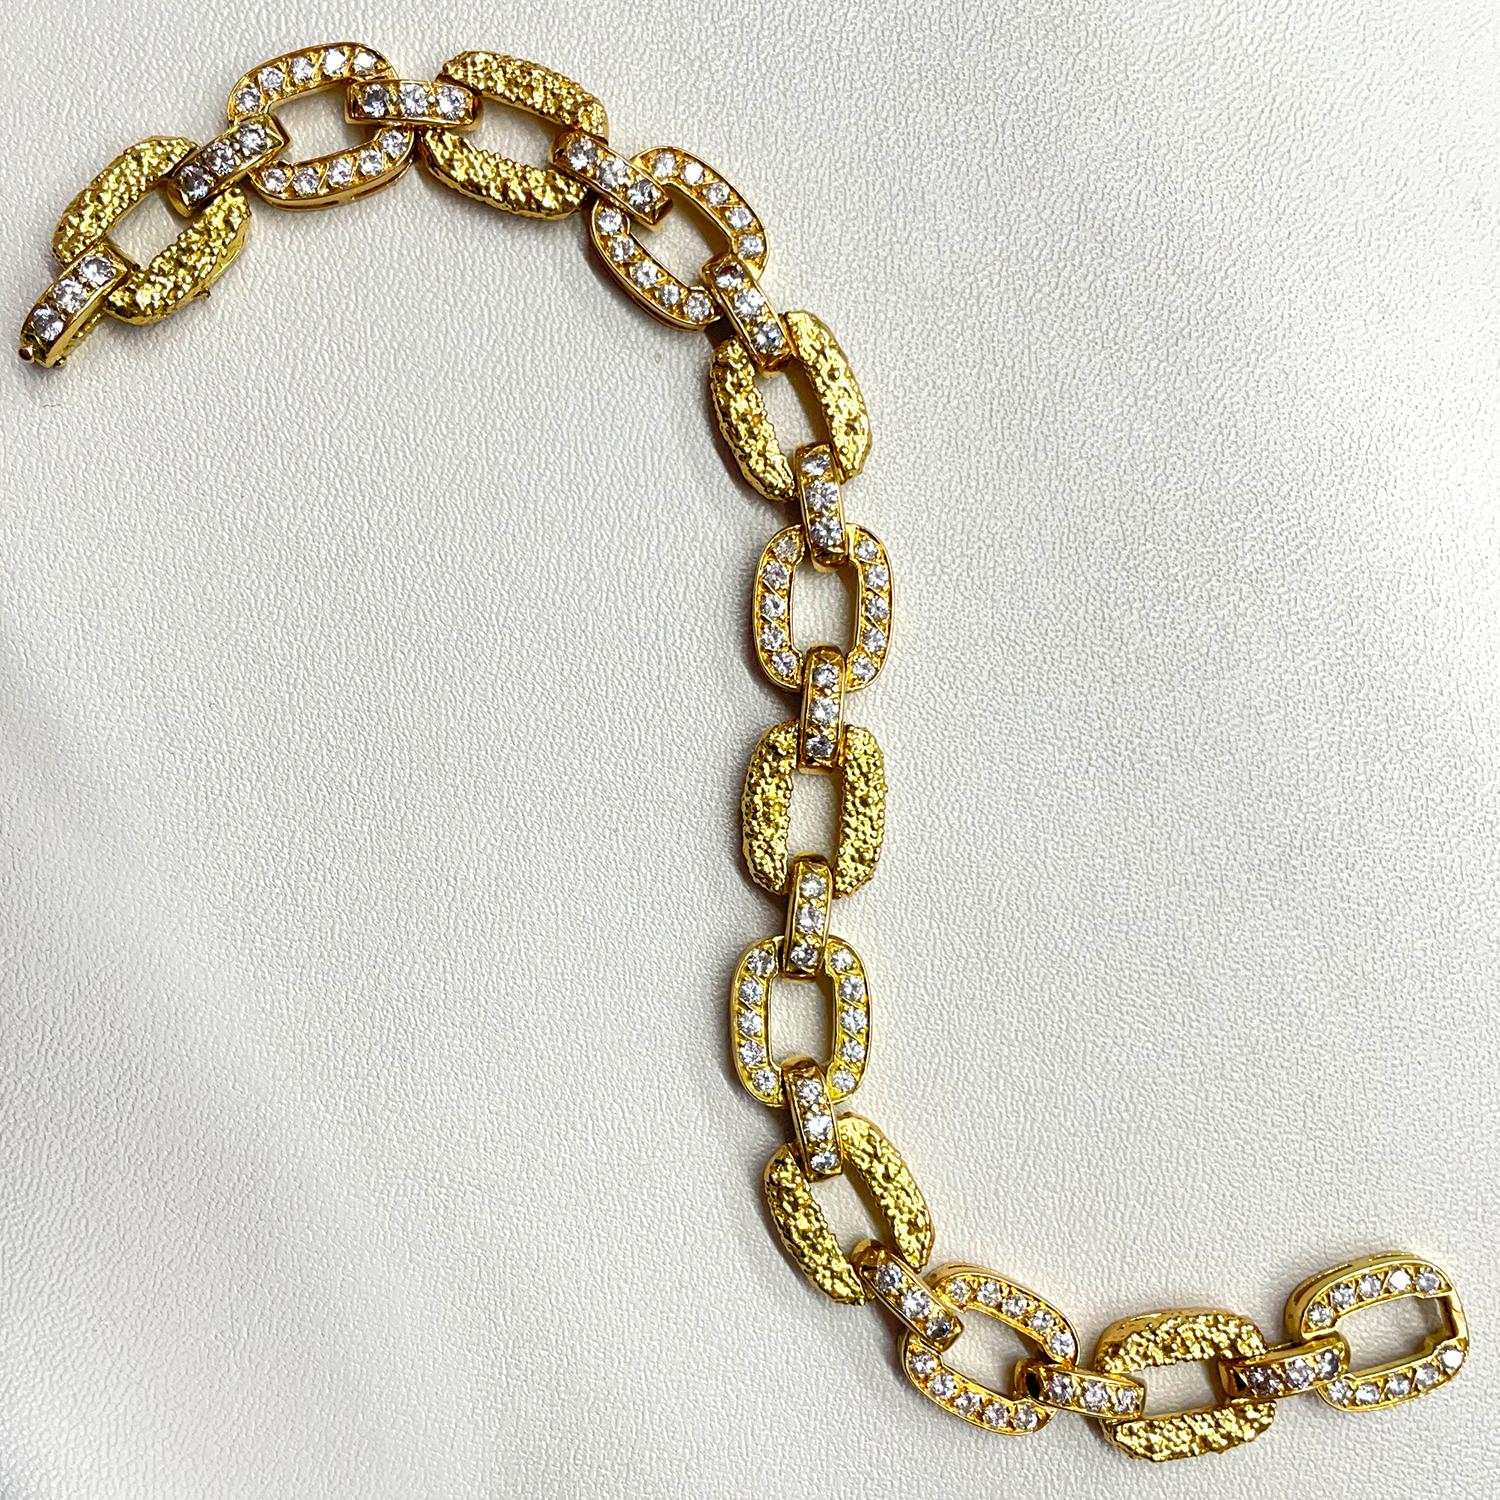 Women's Van Cleef and Arpels Diamond and Textured Gold Bracelet, ca. 1940s For Sale